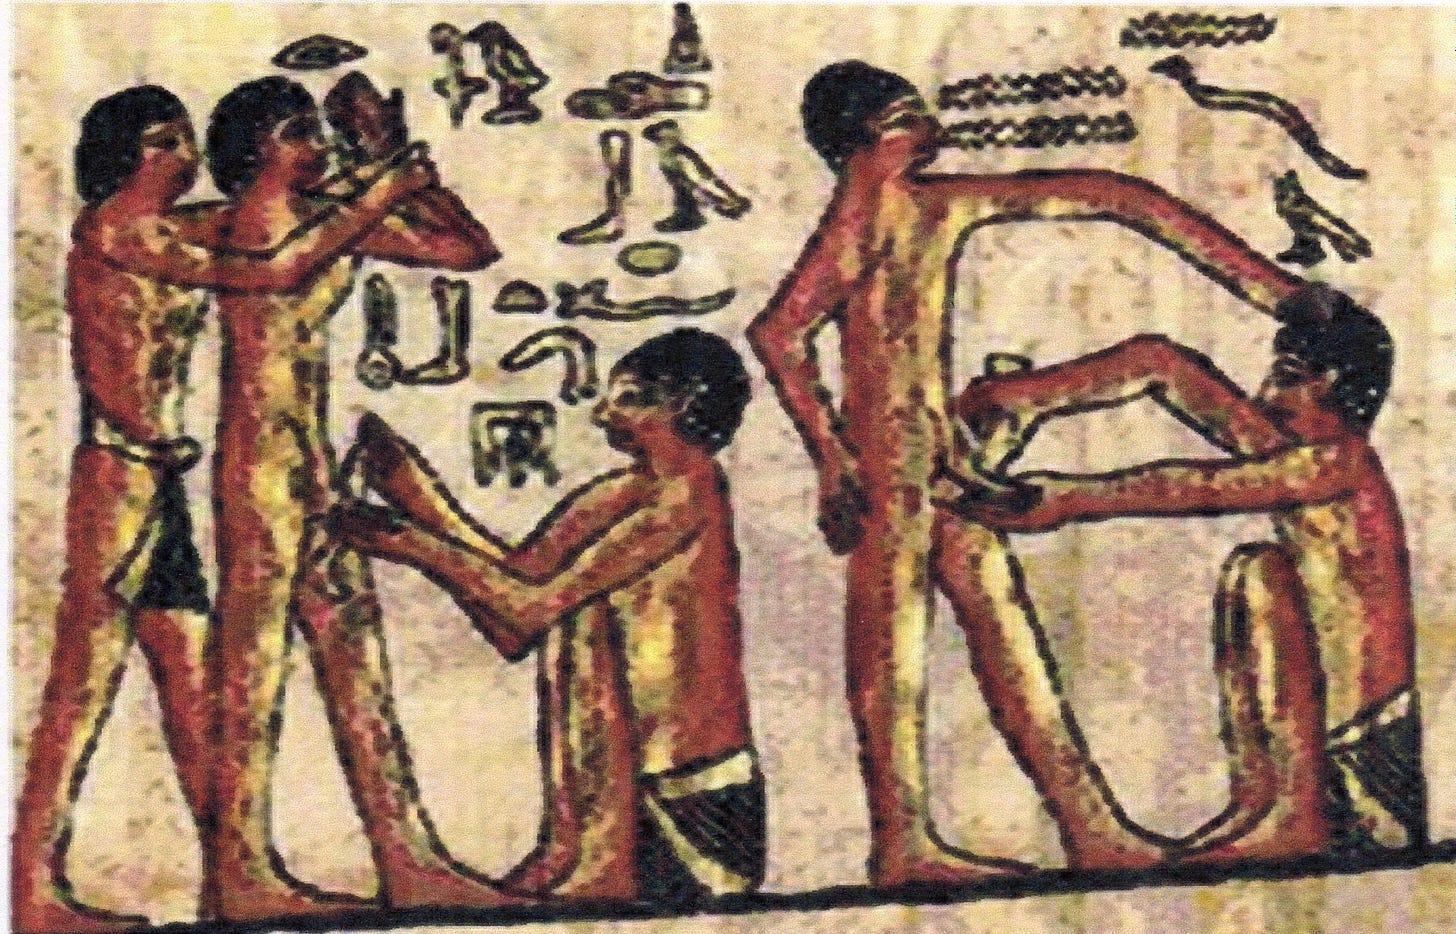 File:Egyptian Doctor healing laborers on papyrus.jpg - Wikimedia Commons